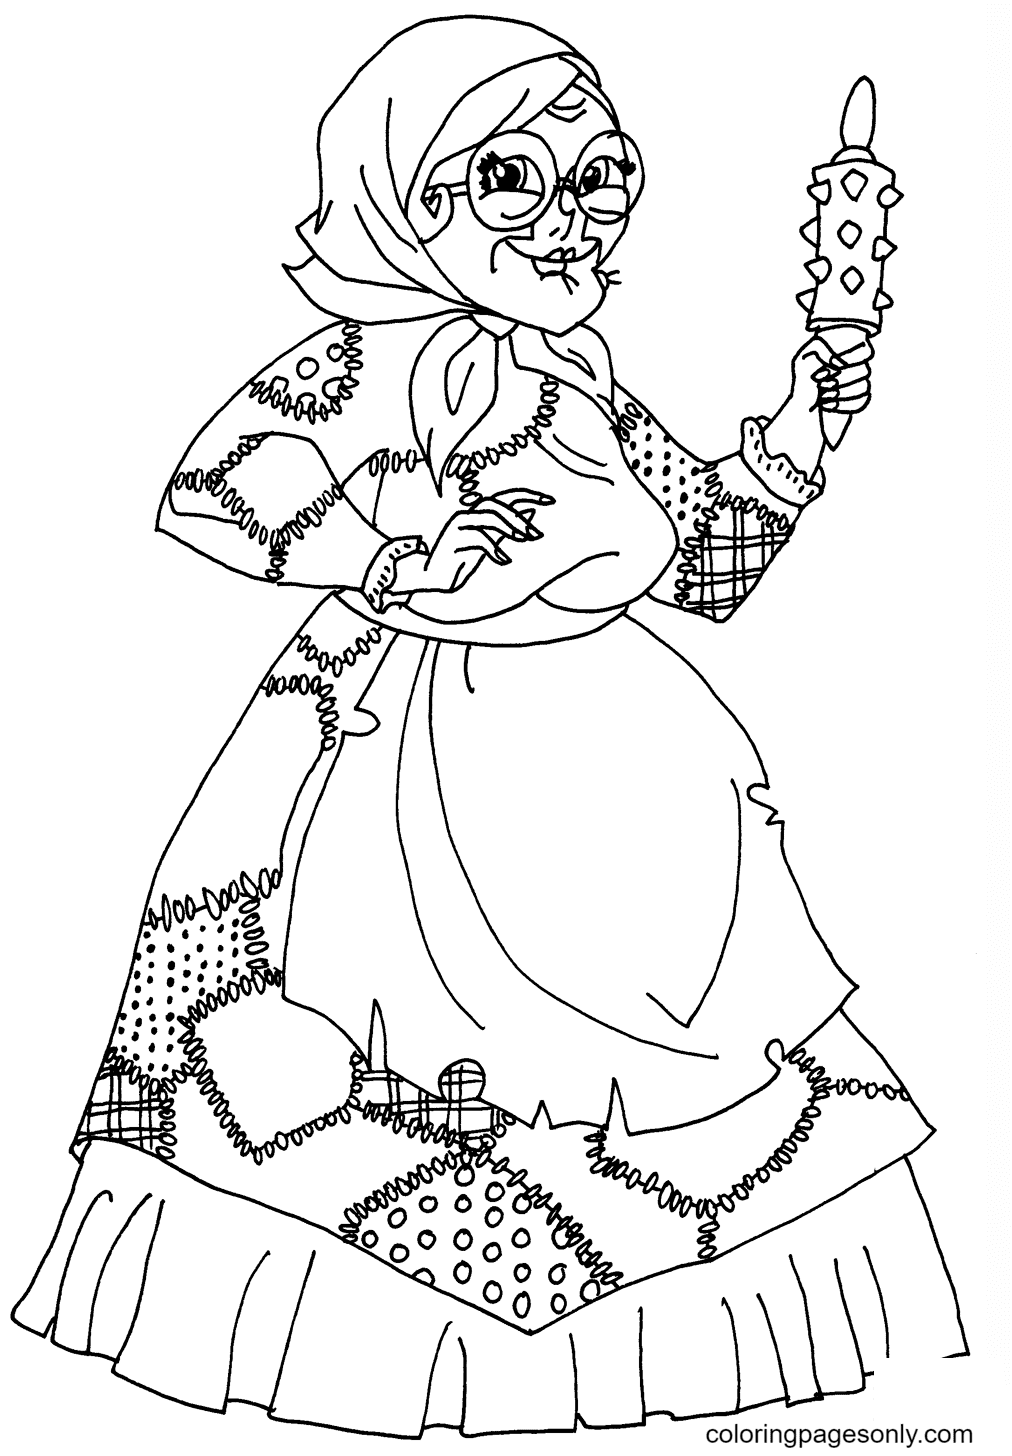 Ms Kindergrubber Coloring Pages